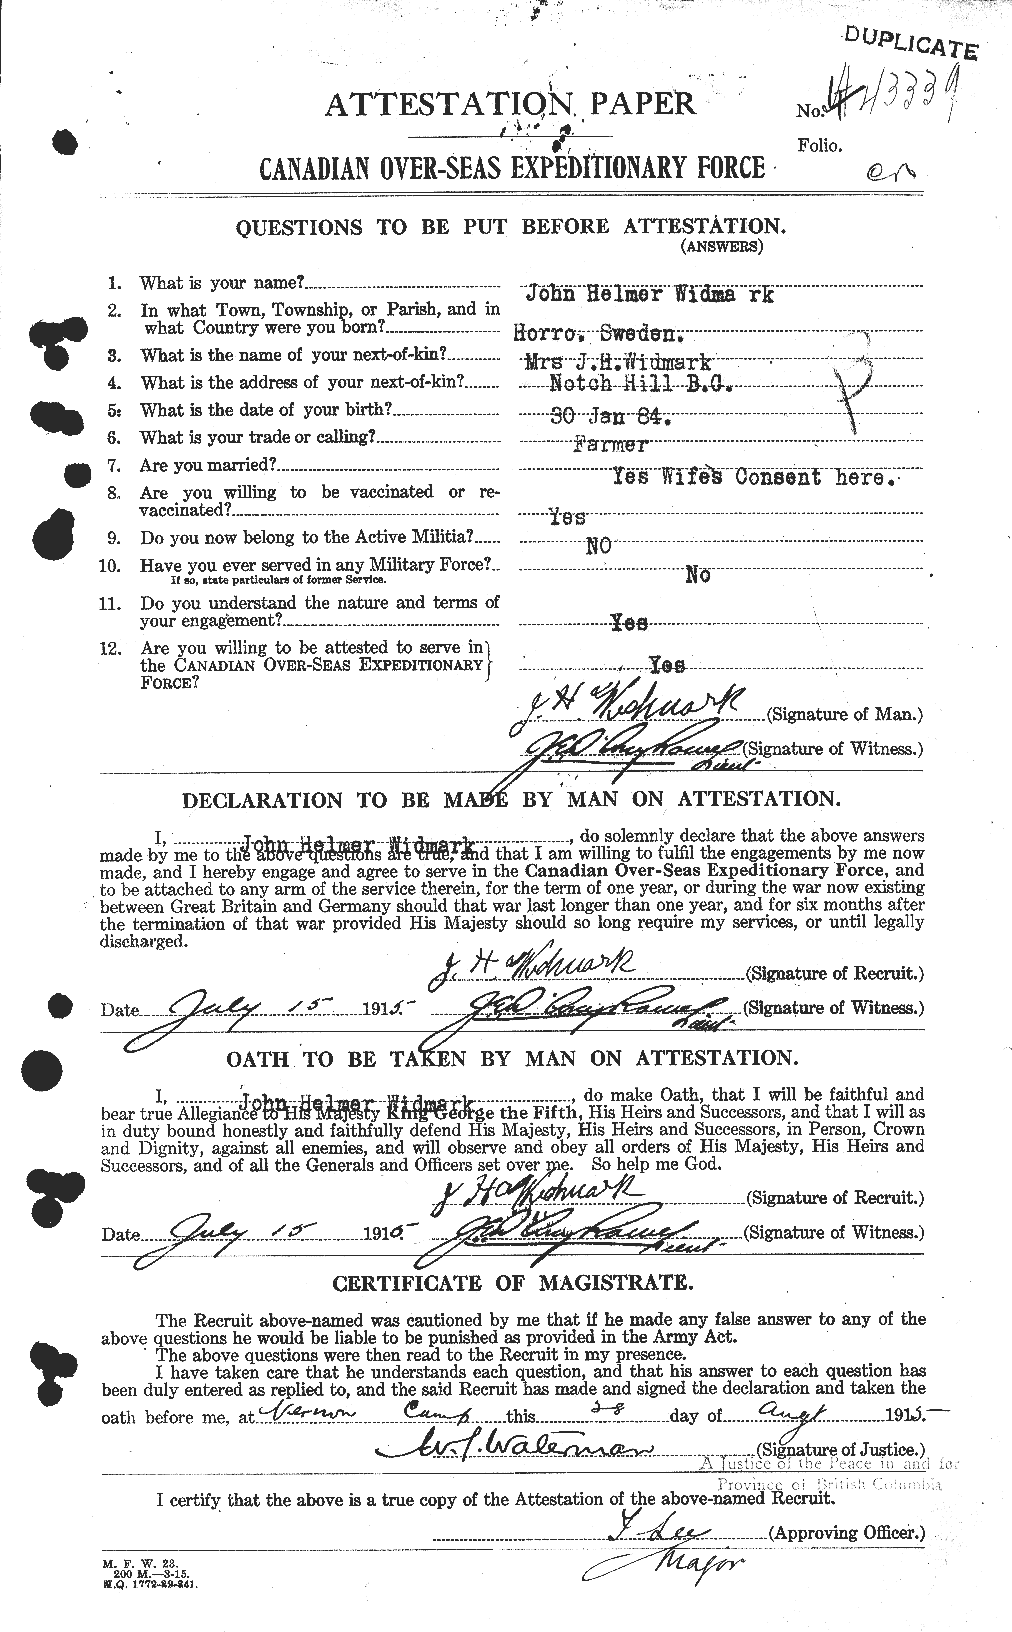 Personnel Records of the First World War - CEF 674118a